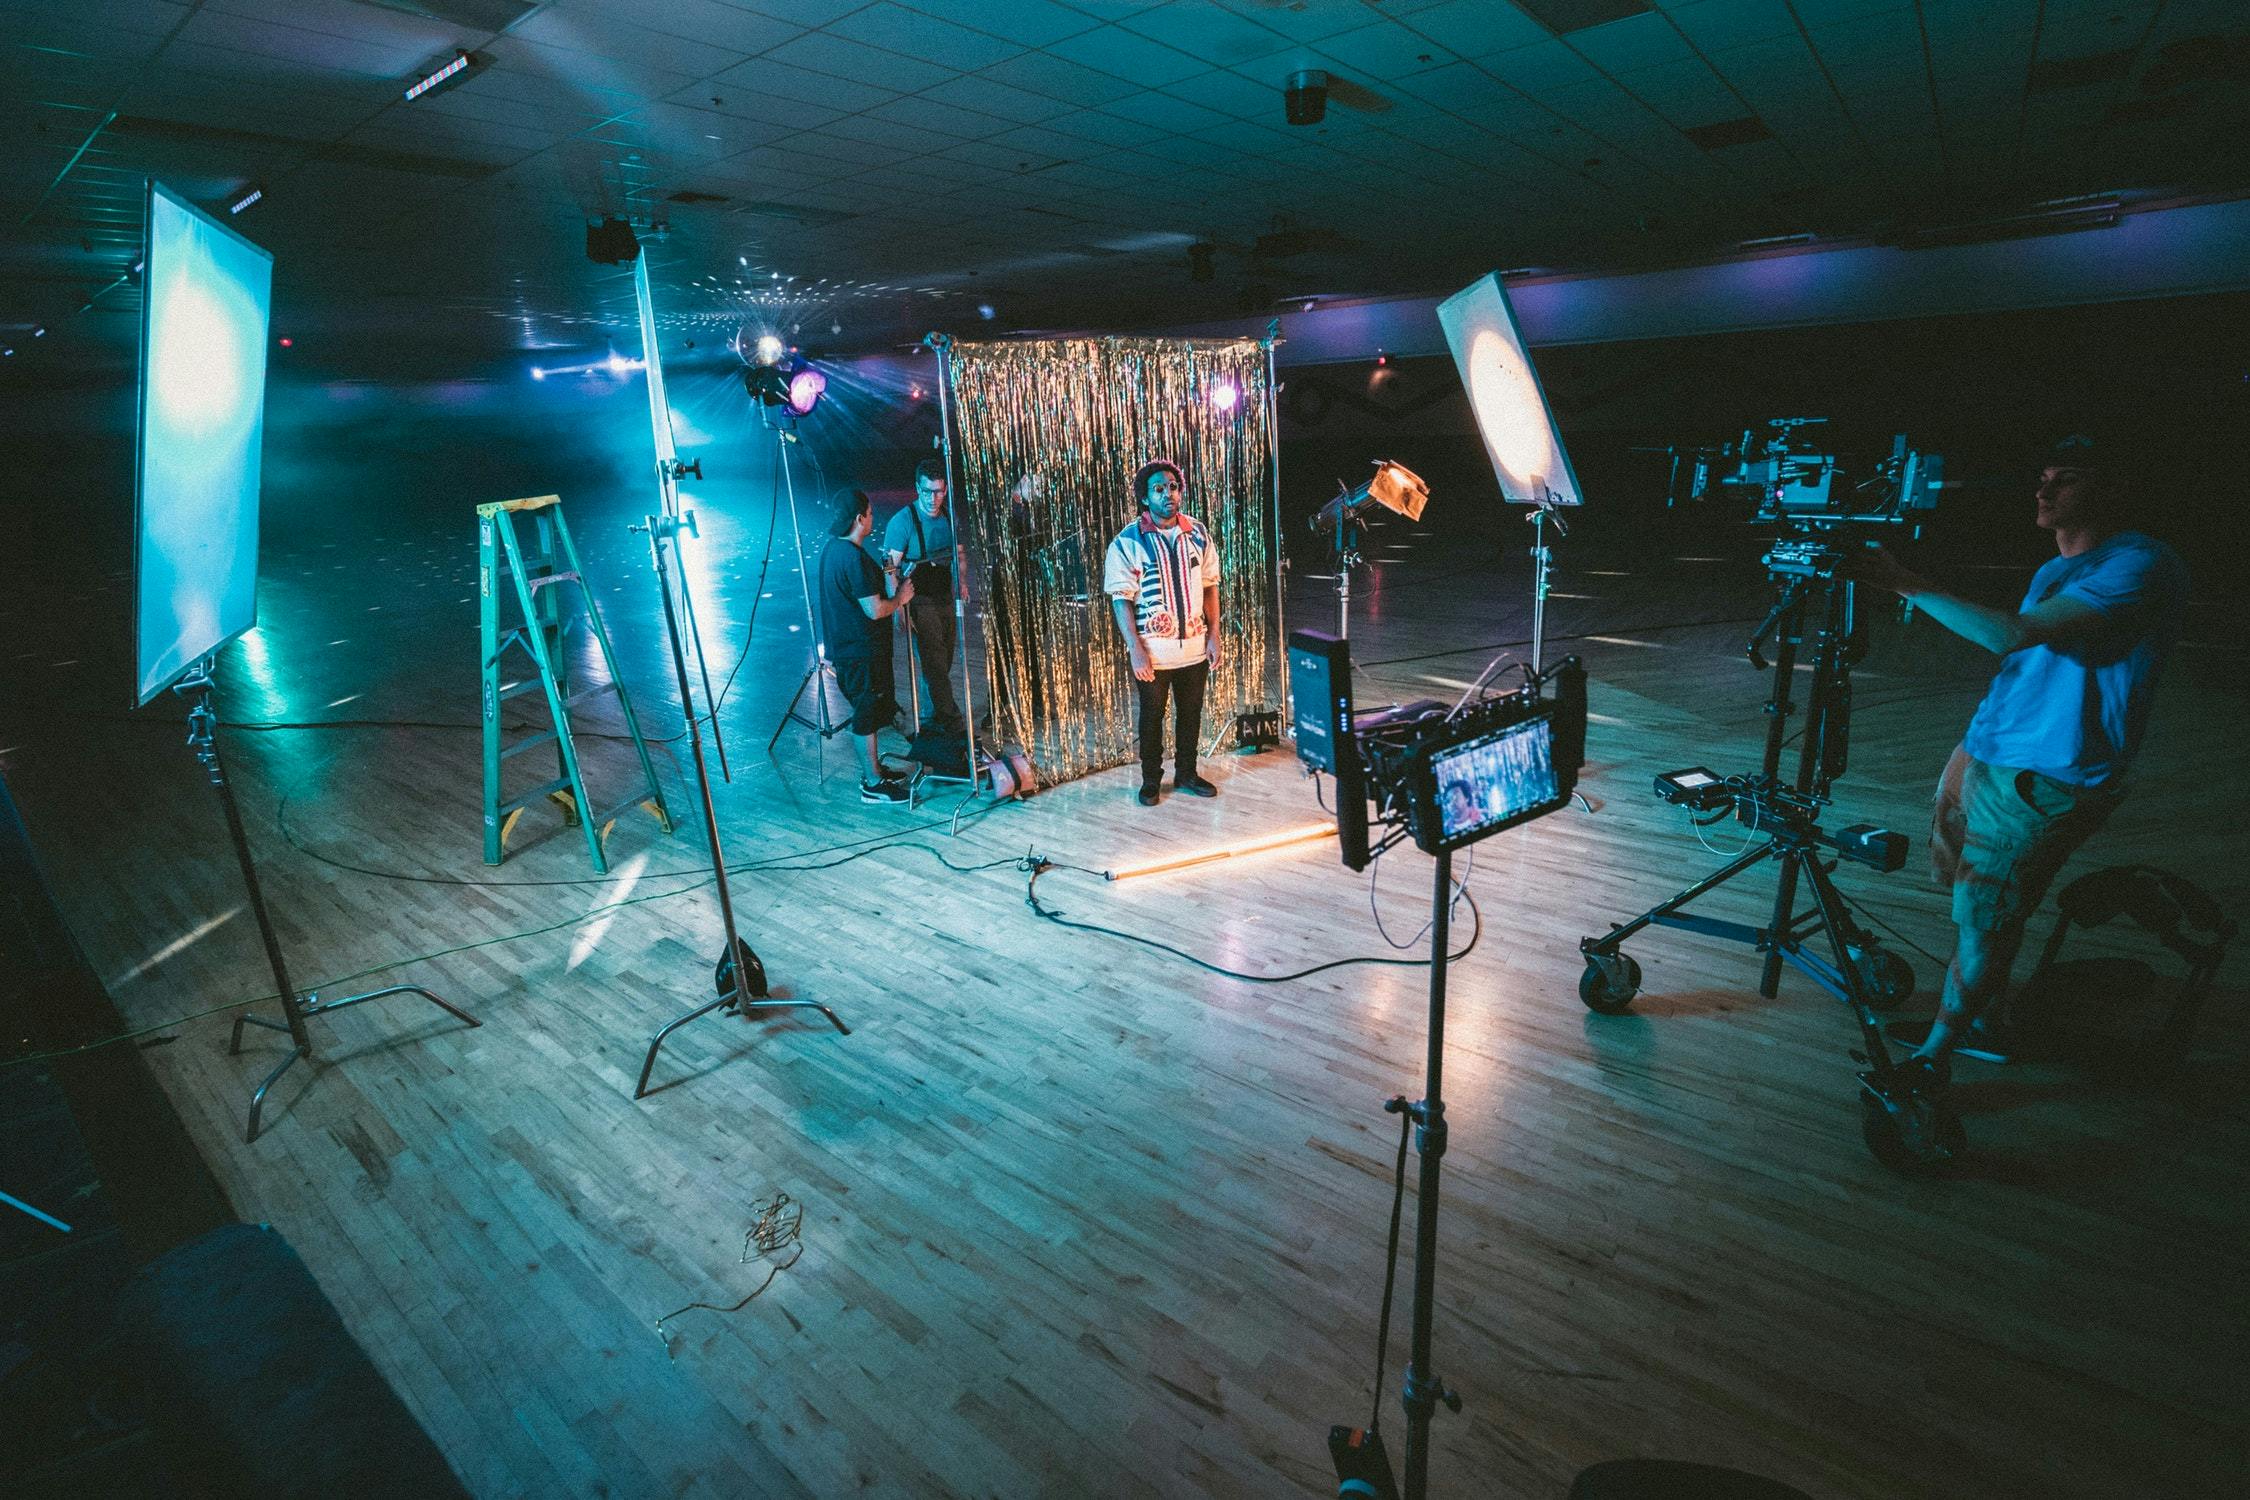 Behind the scenes of a photoshoot with a sparkly backdrop in a spacious studio